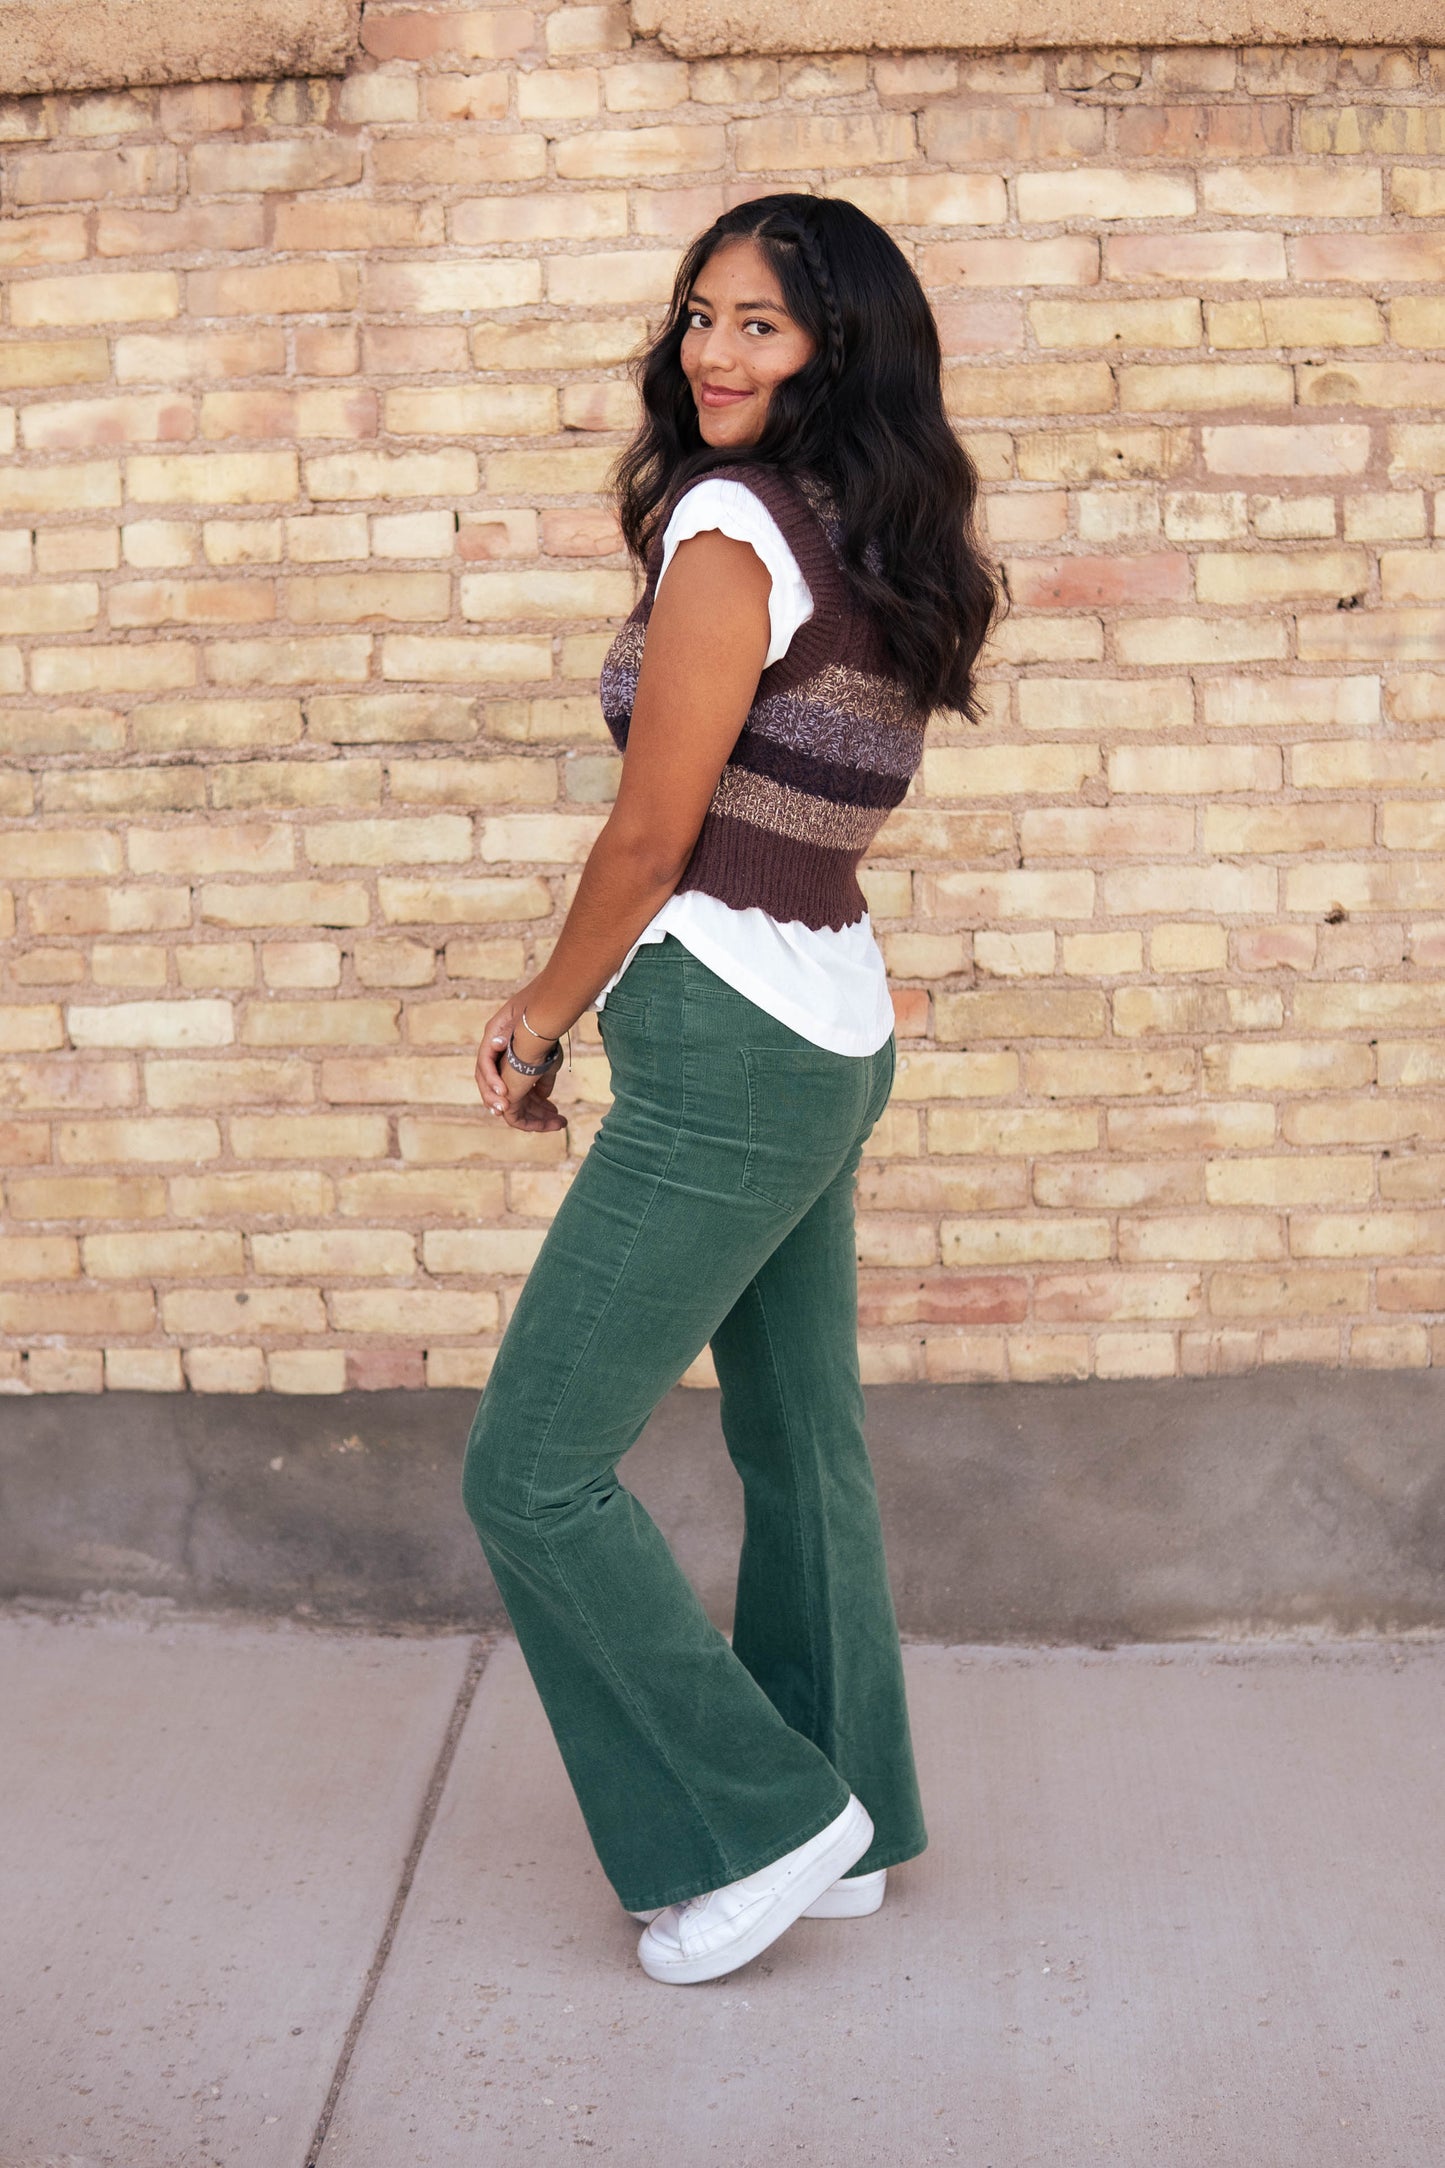 Corduroy Pants, Cords, Green pants, back to school clothes